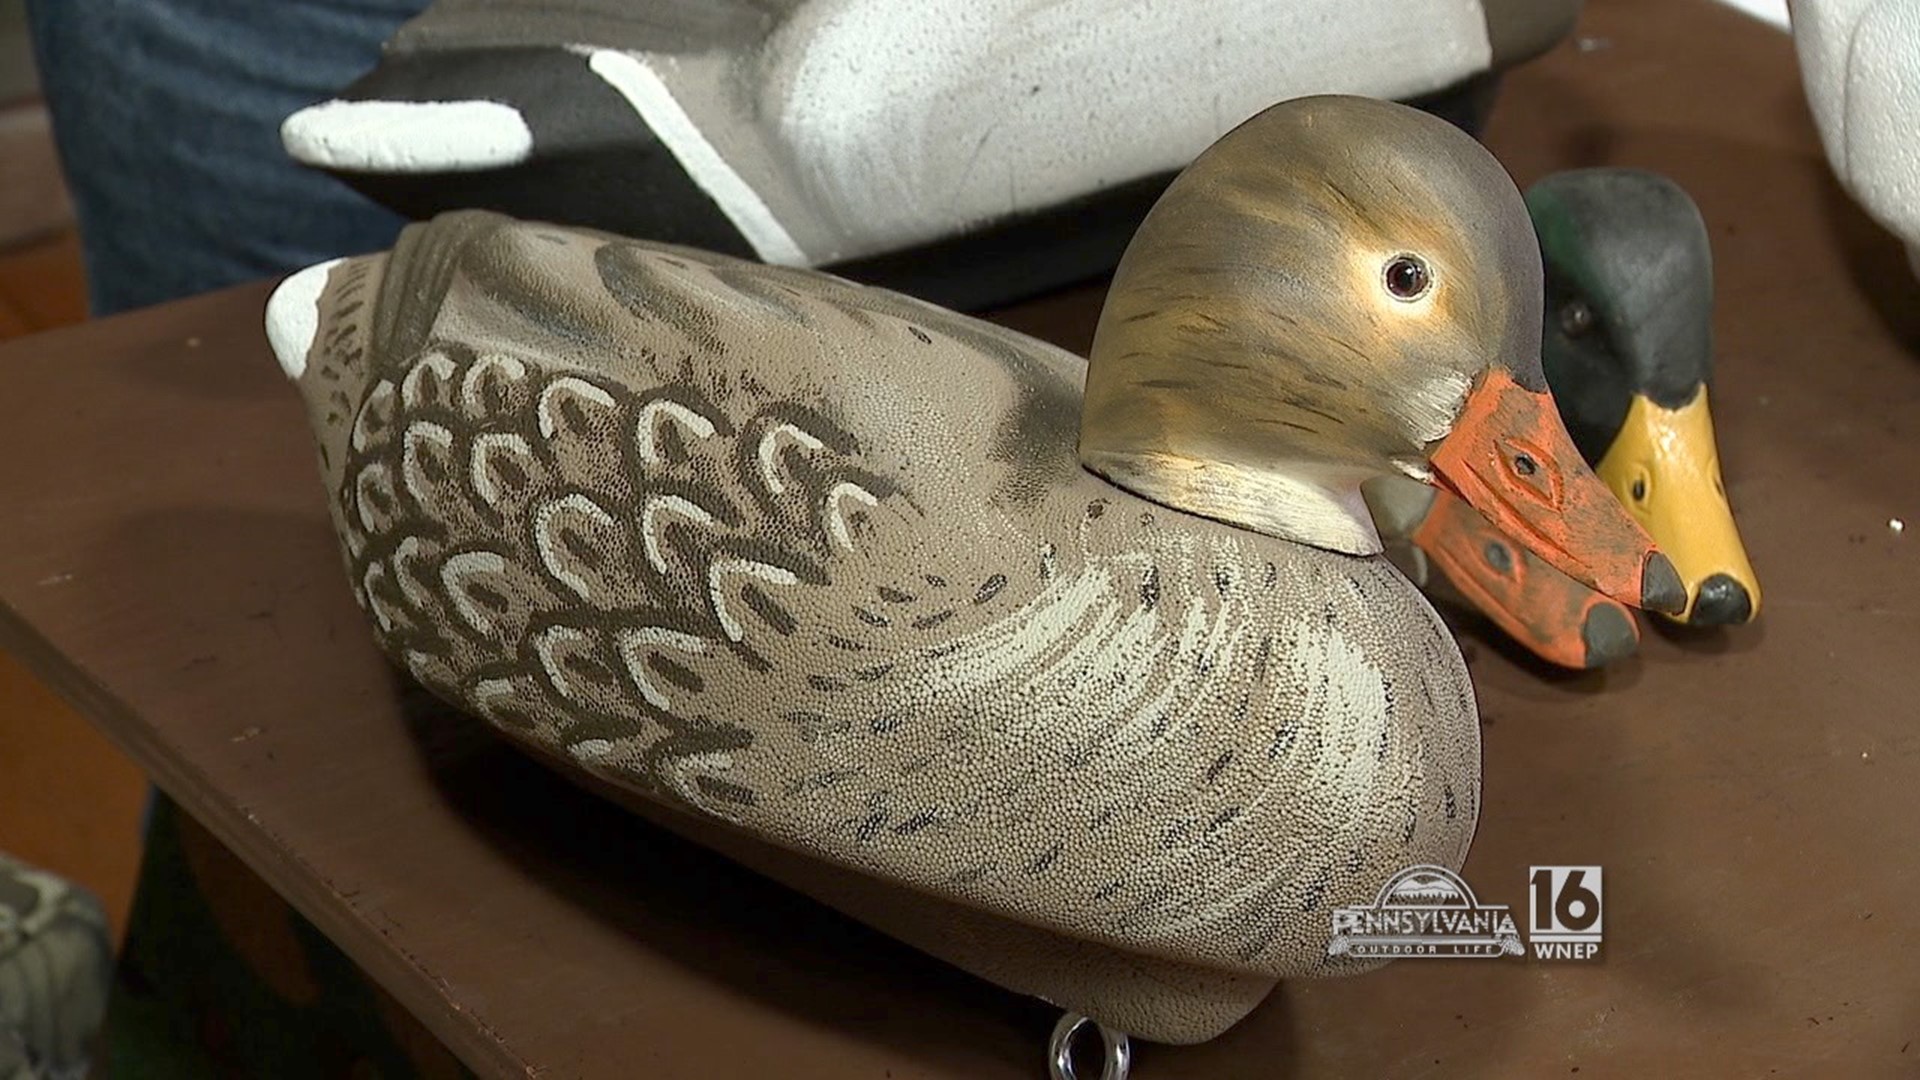 You could be the winner of some Meyer's Classic Decoys!